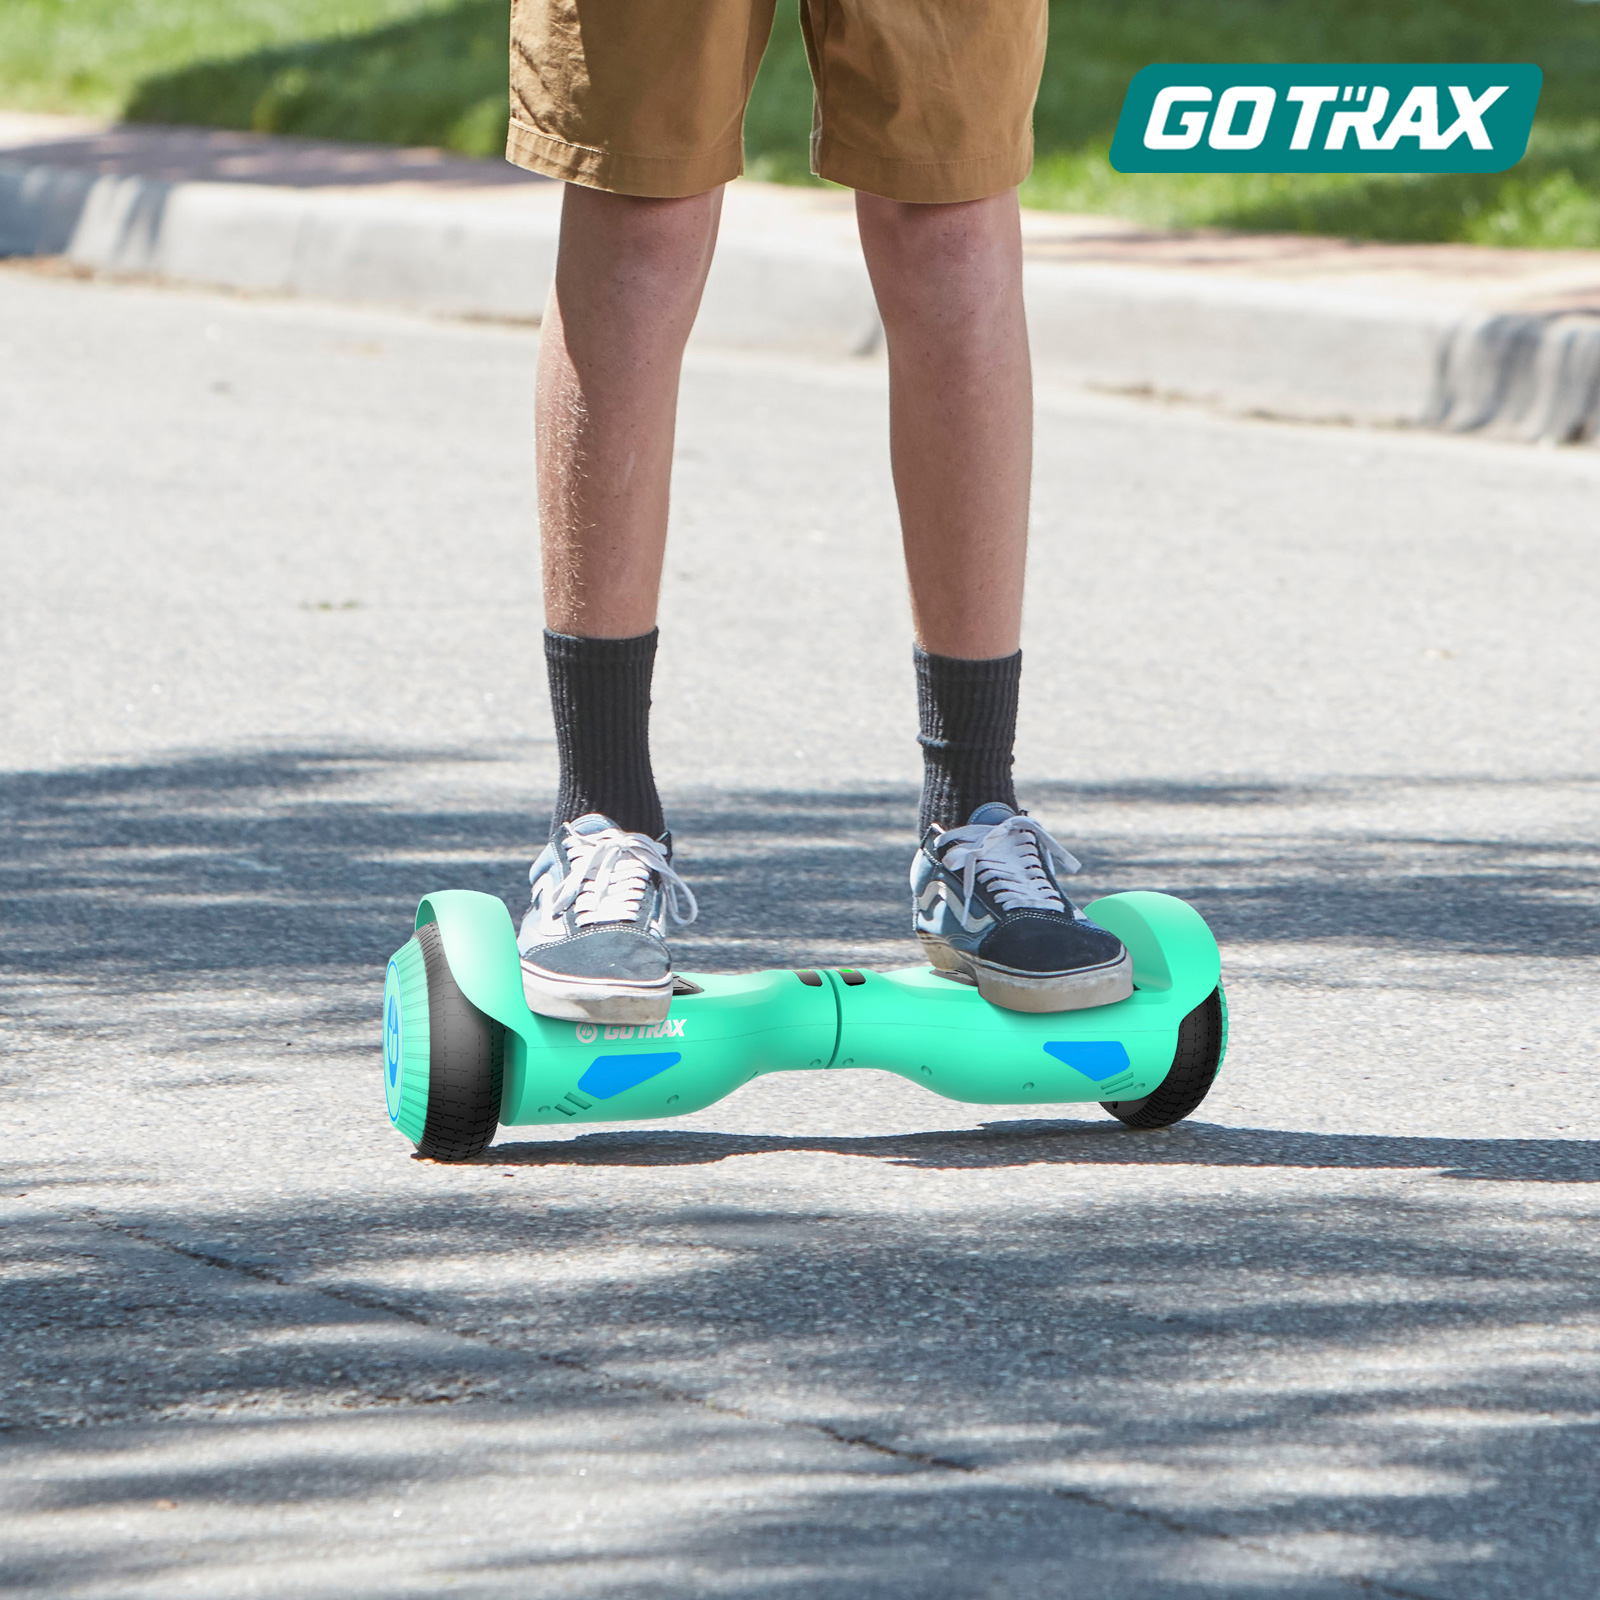 GOTRAX Edge Hoverboard for Kids Adults, 6.5" Tires 6.2mph & 2.5 Miles Self Balancing Scooter, Purple - image 5 of 9